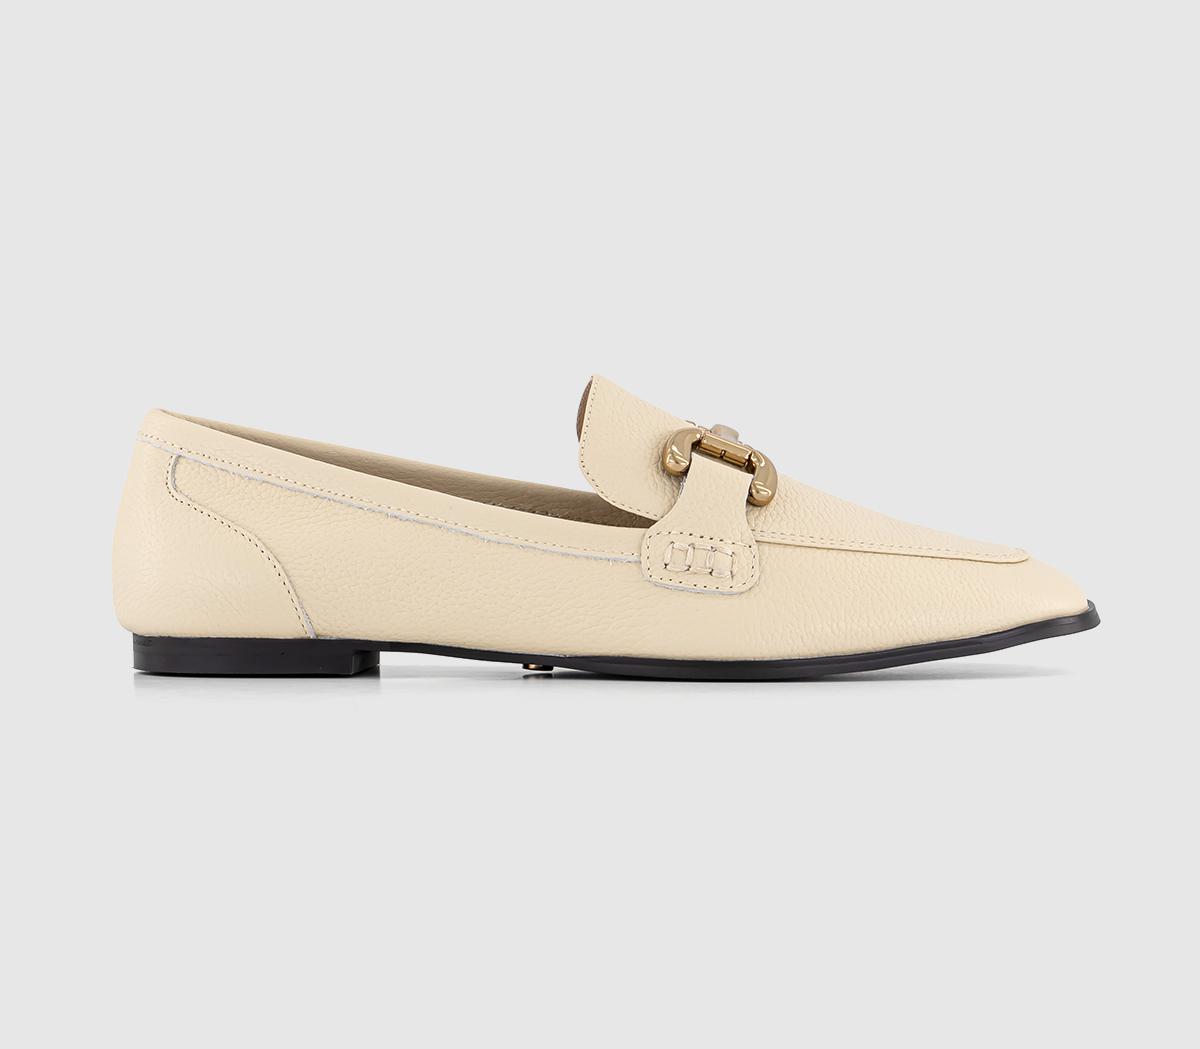 OFFICEFarland Leather Trim LoafersOff White Leather